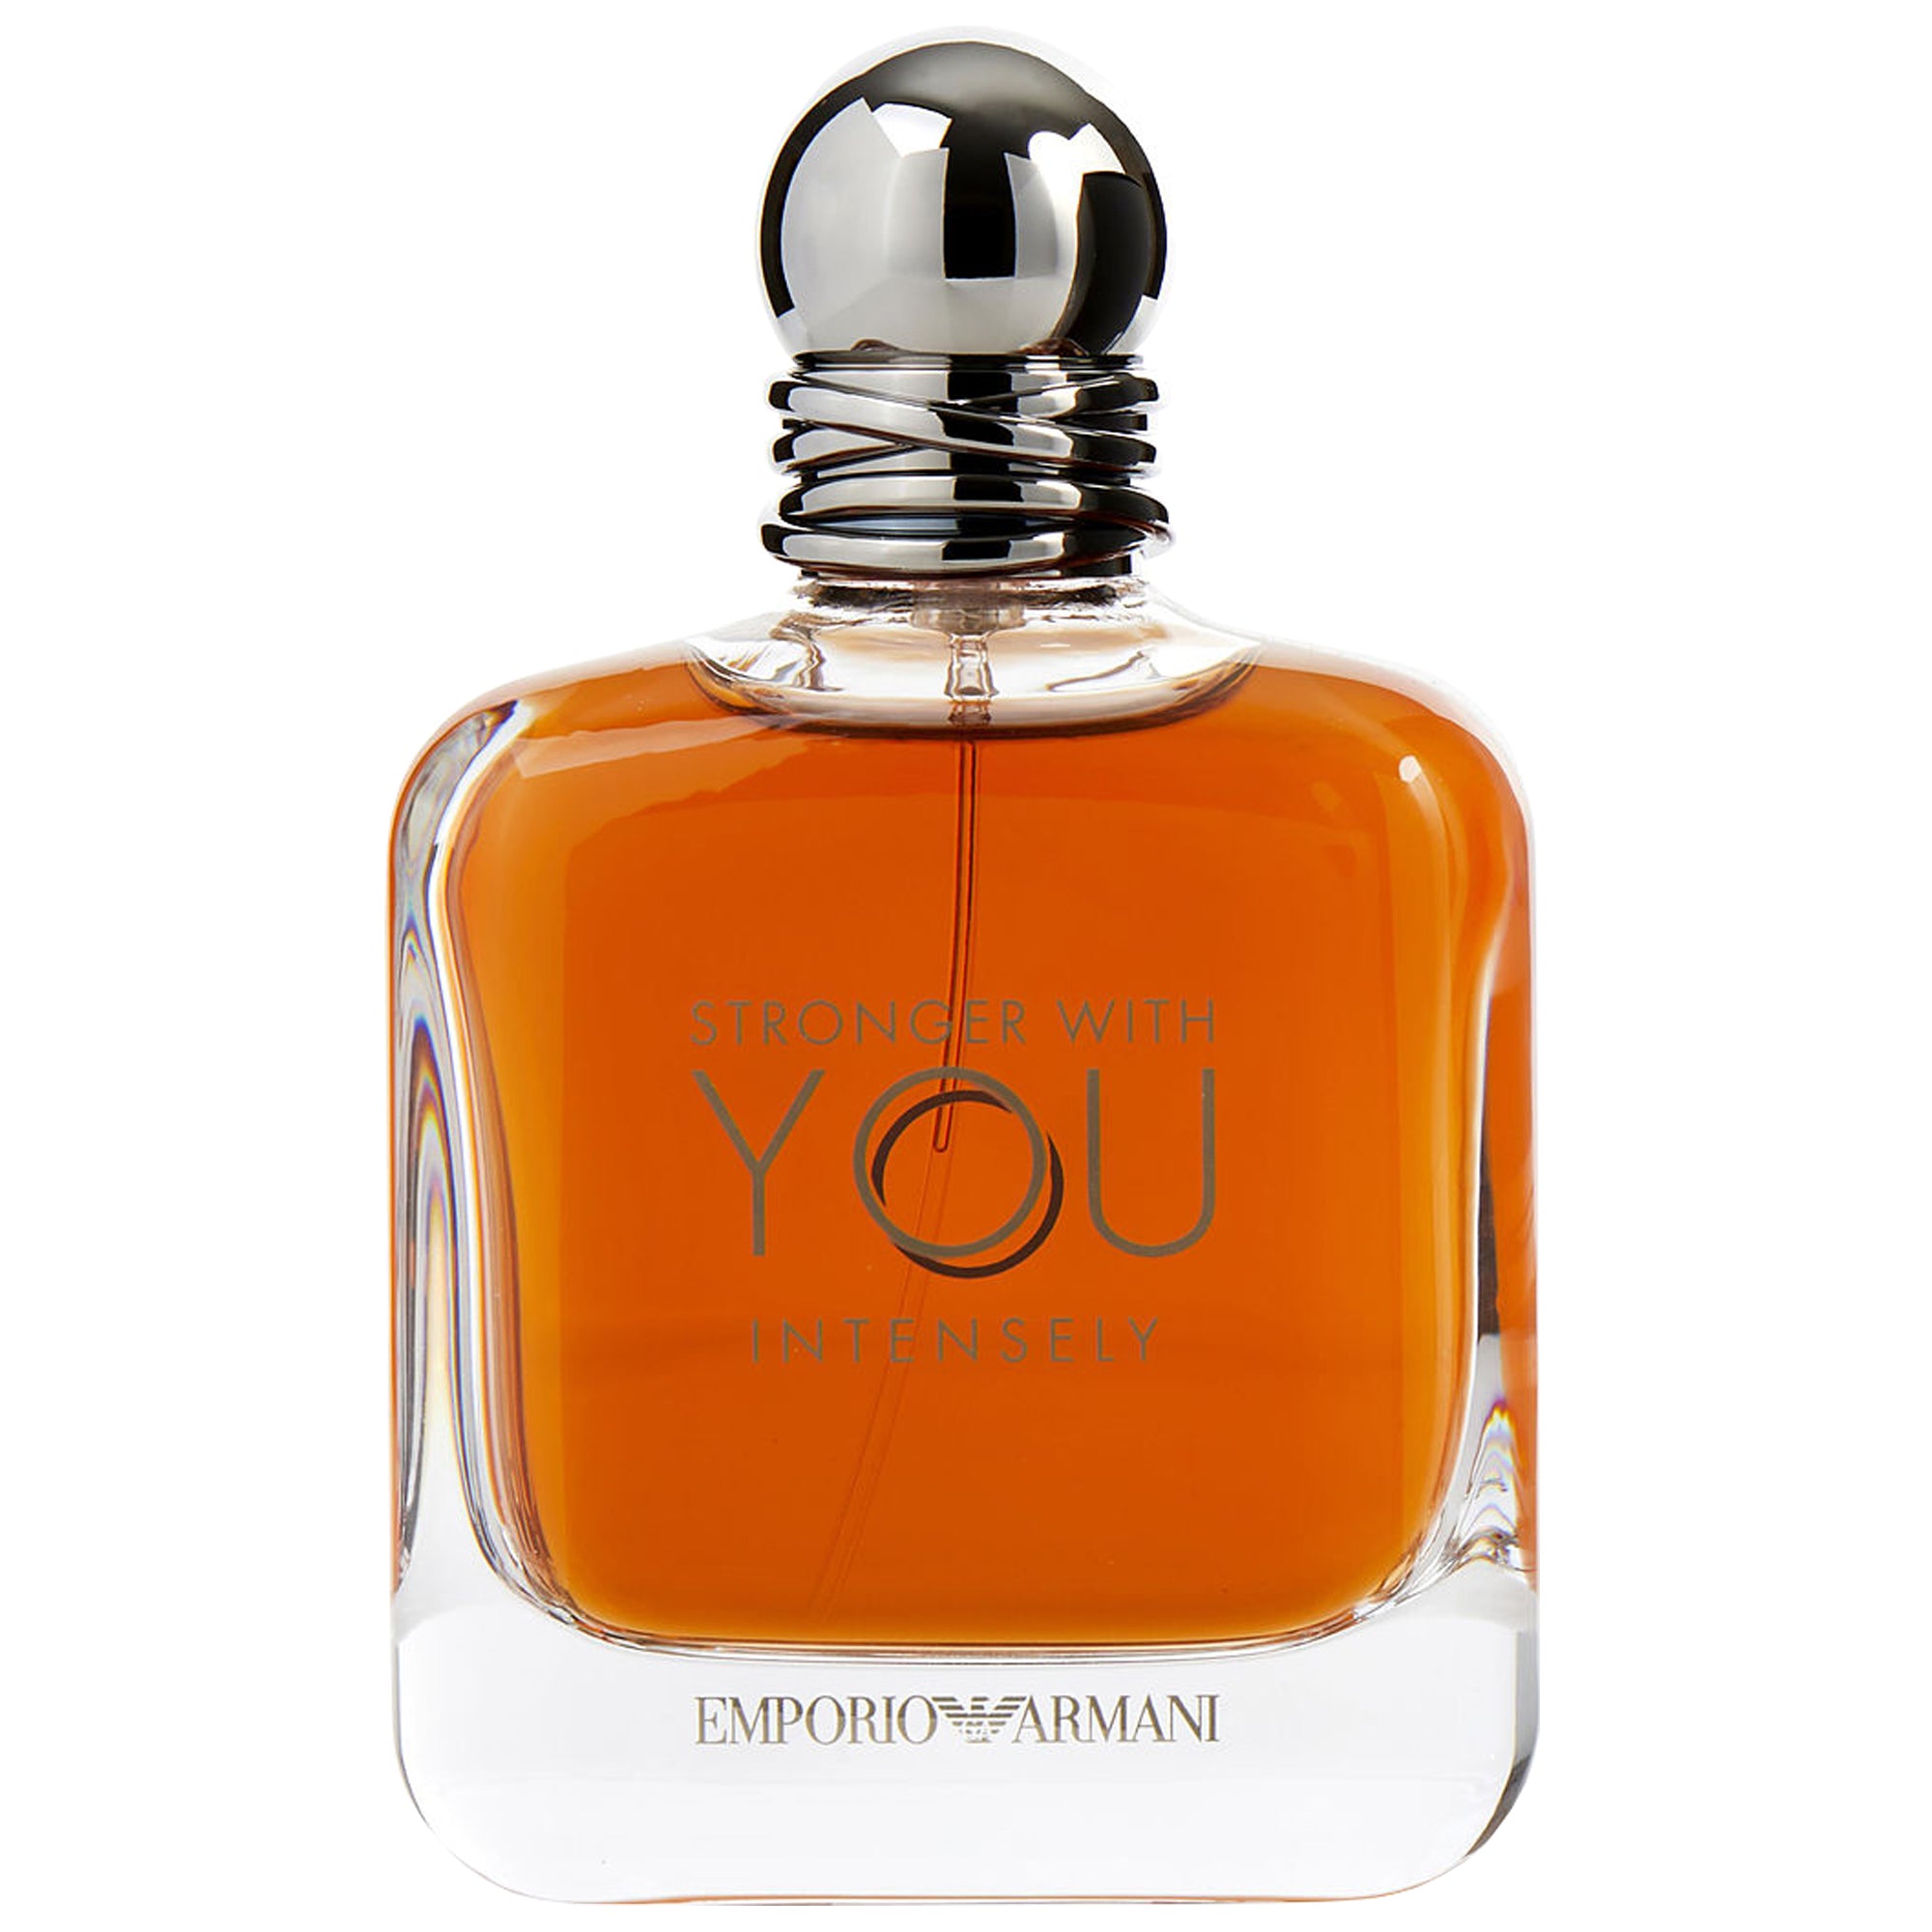 Stronger With You Intensely by Emporio Armani Fragrance Samples, DecantX